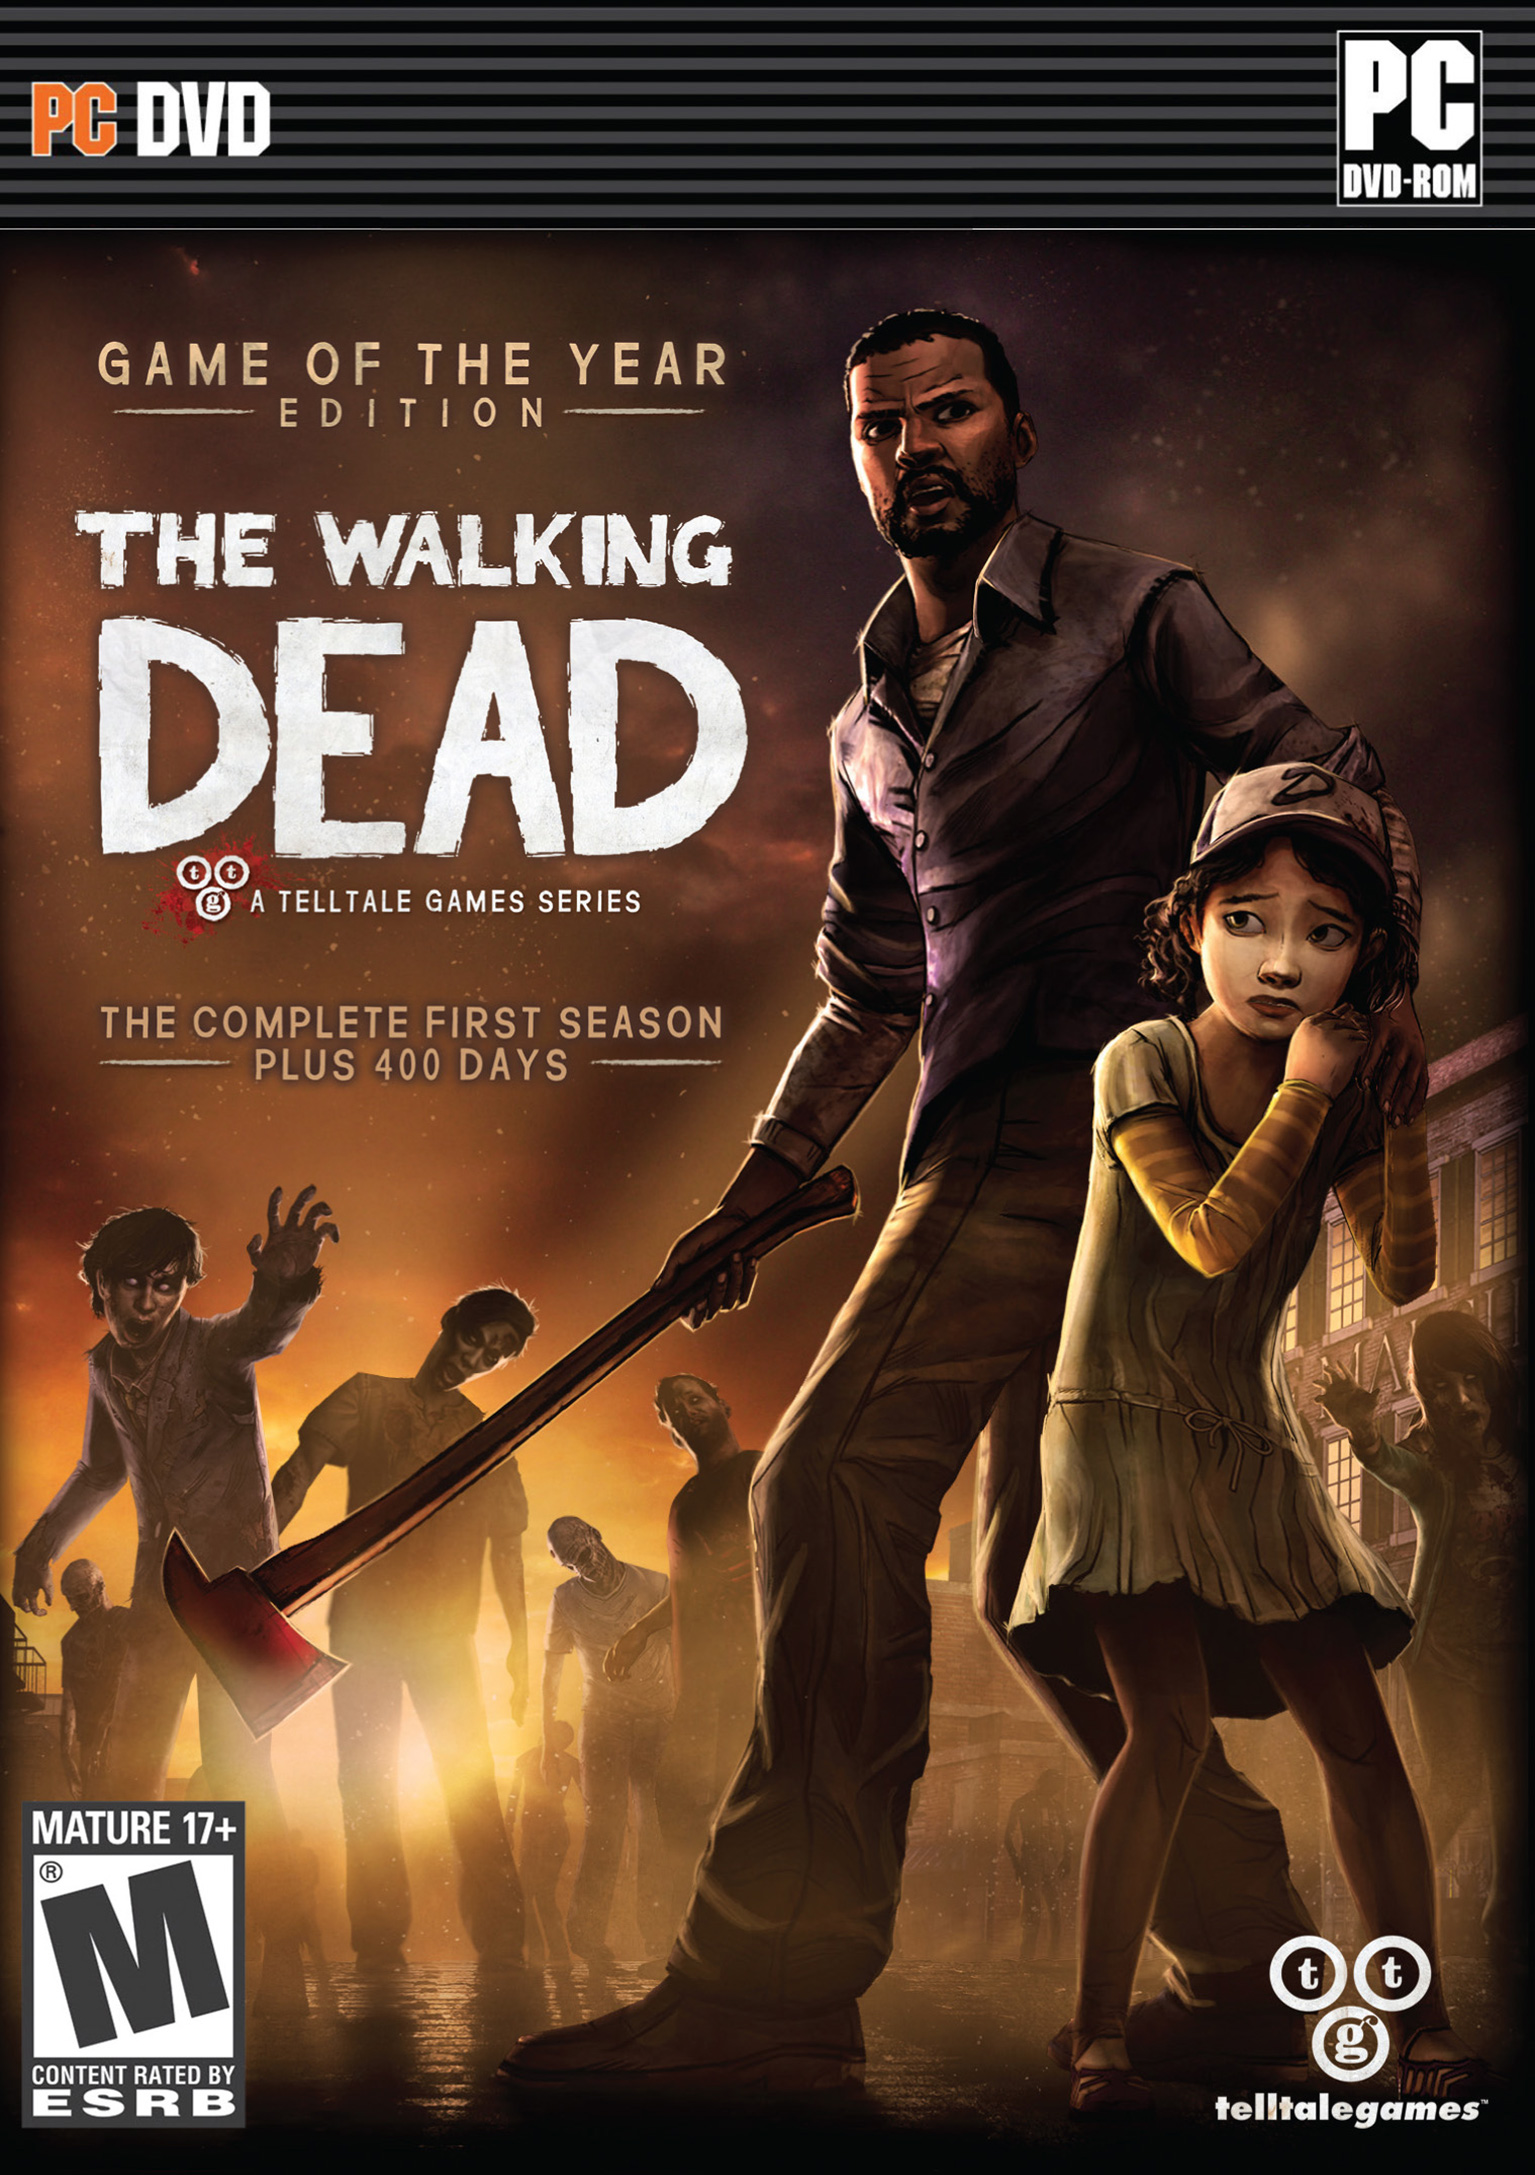 The Walking Dead: A Telltale Games Series - Game of the Year Edition - pedn DVD obal